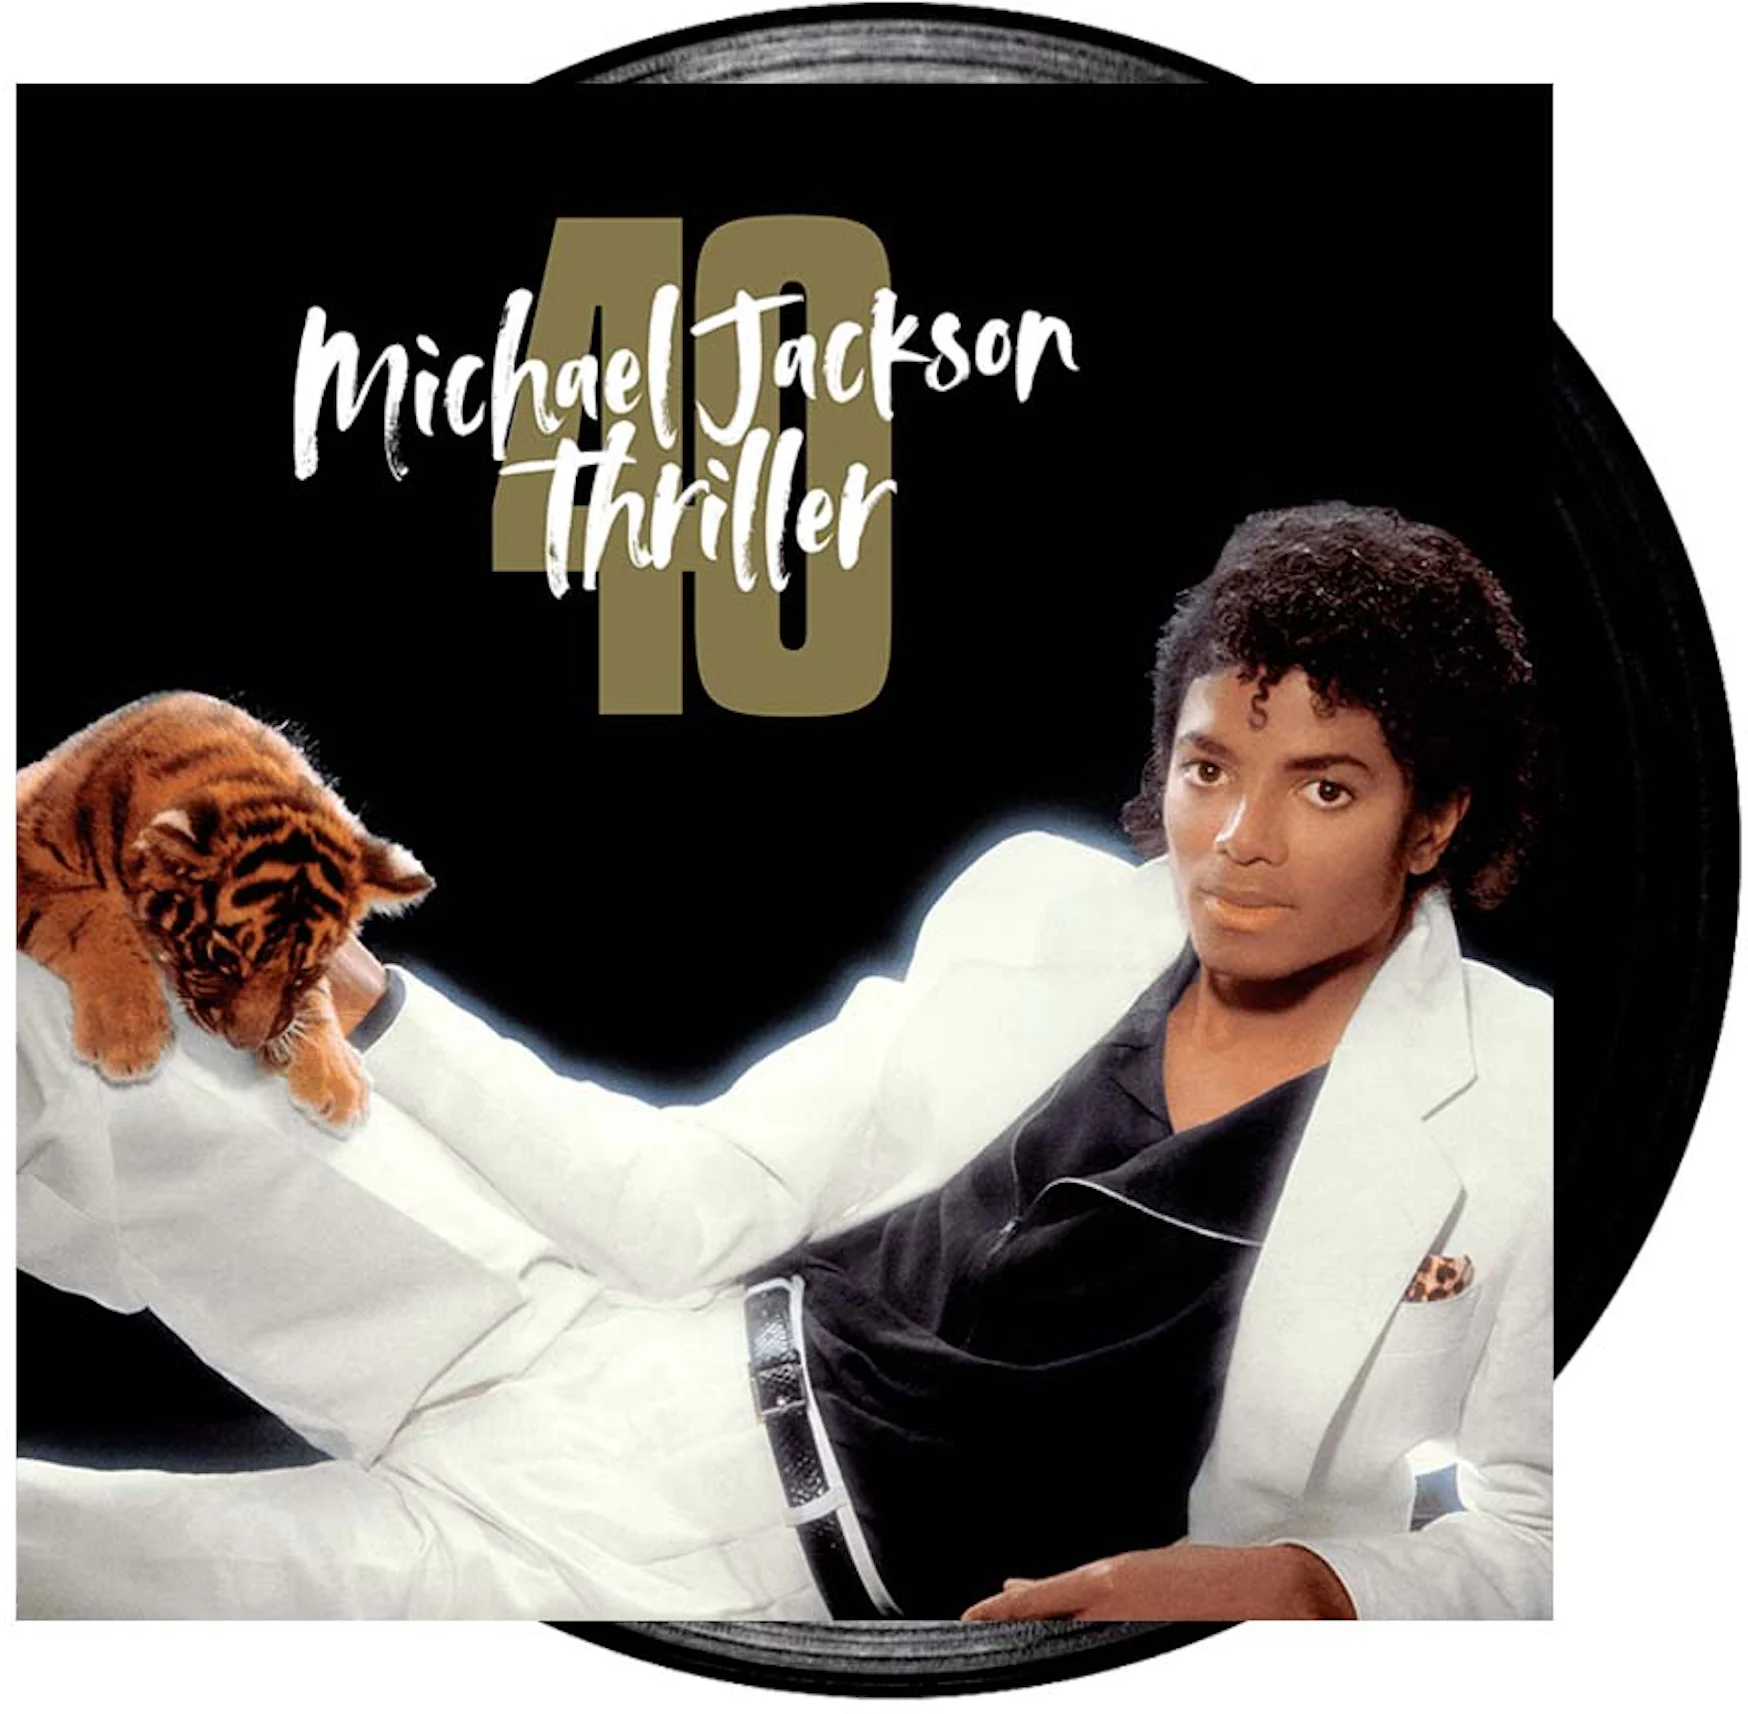 𝕜𝕩 on X: TOP 20 best-selling albums of all time (pure sales) 1.  #MichaelJackson - Thriller 2. #ACDC - Back in Black 3. #WhitneyHouston -  The Bodyguard  / X